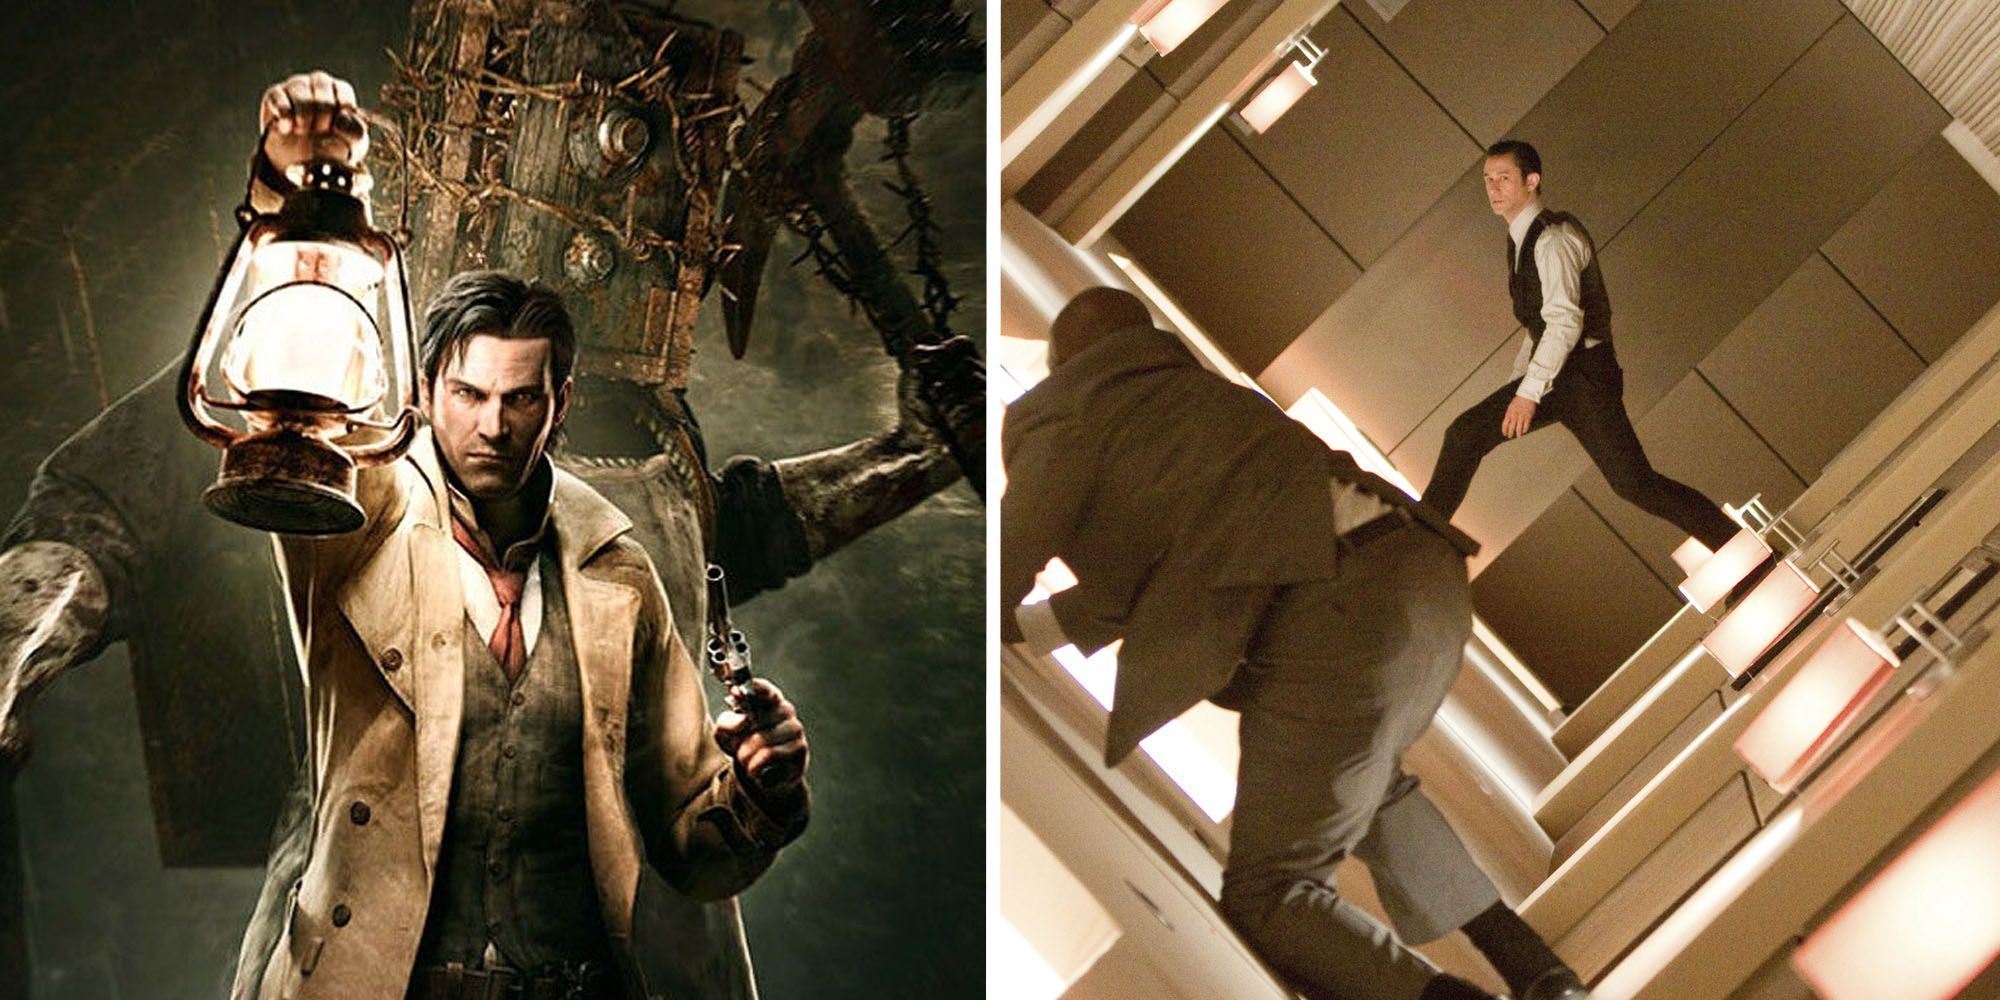 The Evil Within and Inception scene